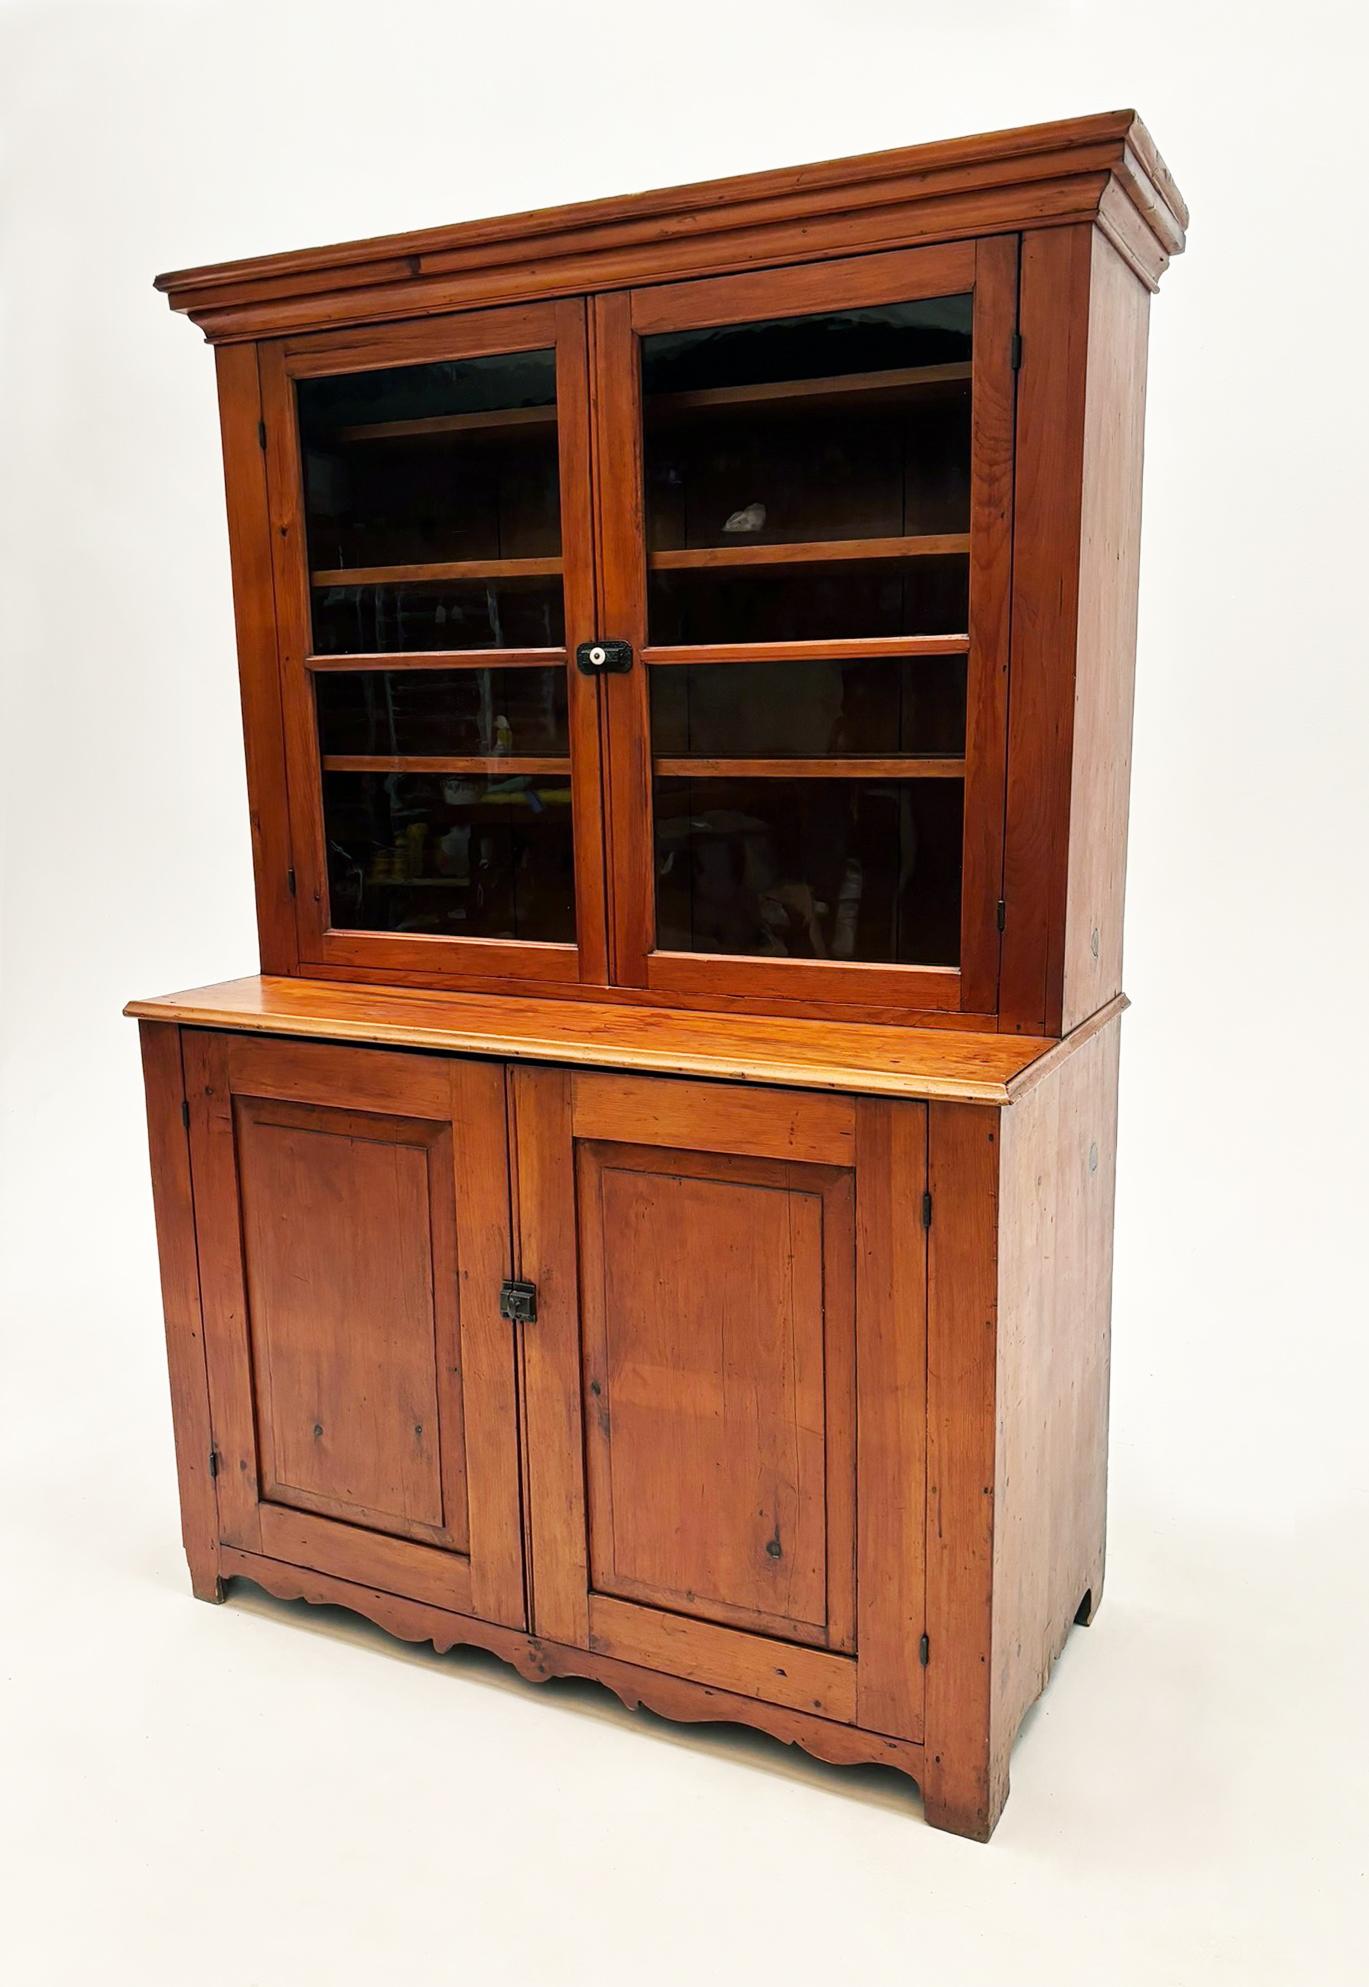 This simple, yet beautiful country pine cupboard features a primitive design of two solid doors on the bottom and two framed wavy glass doors on the top, which is set back allowing for a narrow counter area.

Beautiful American pine comprises this